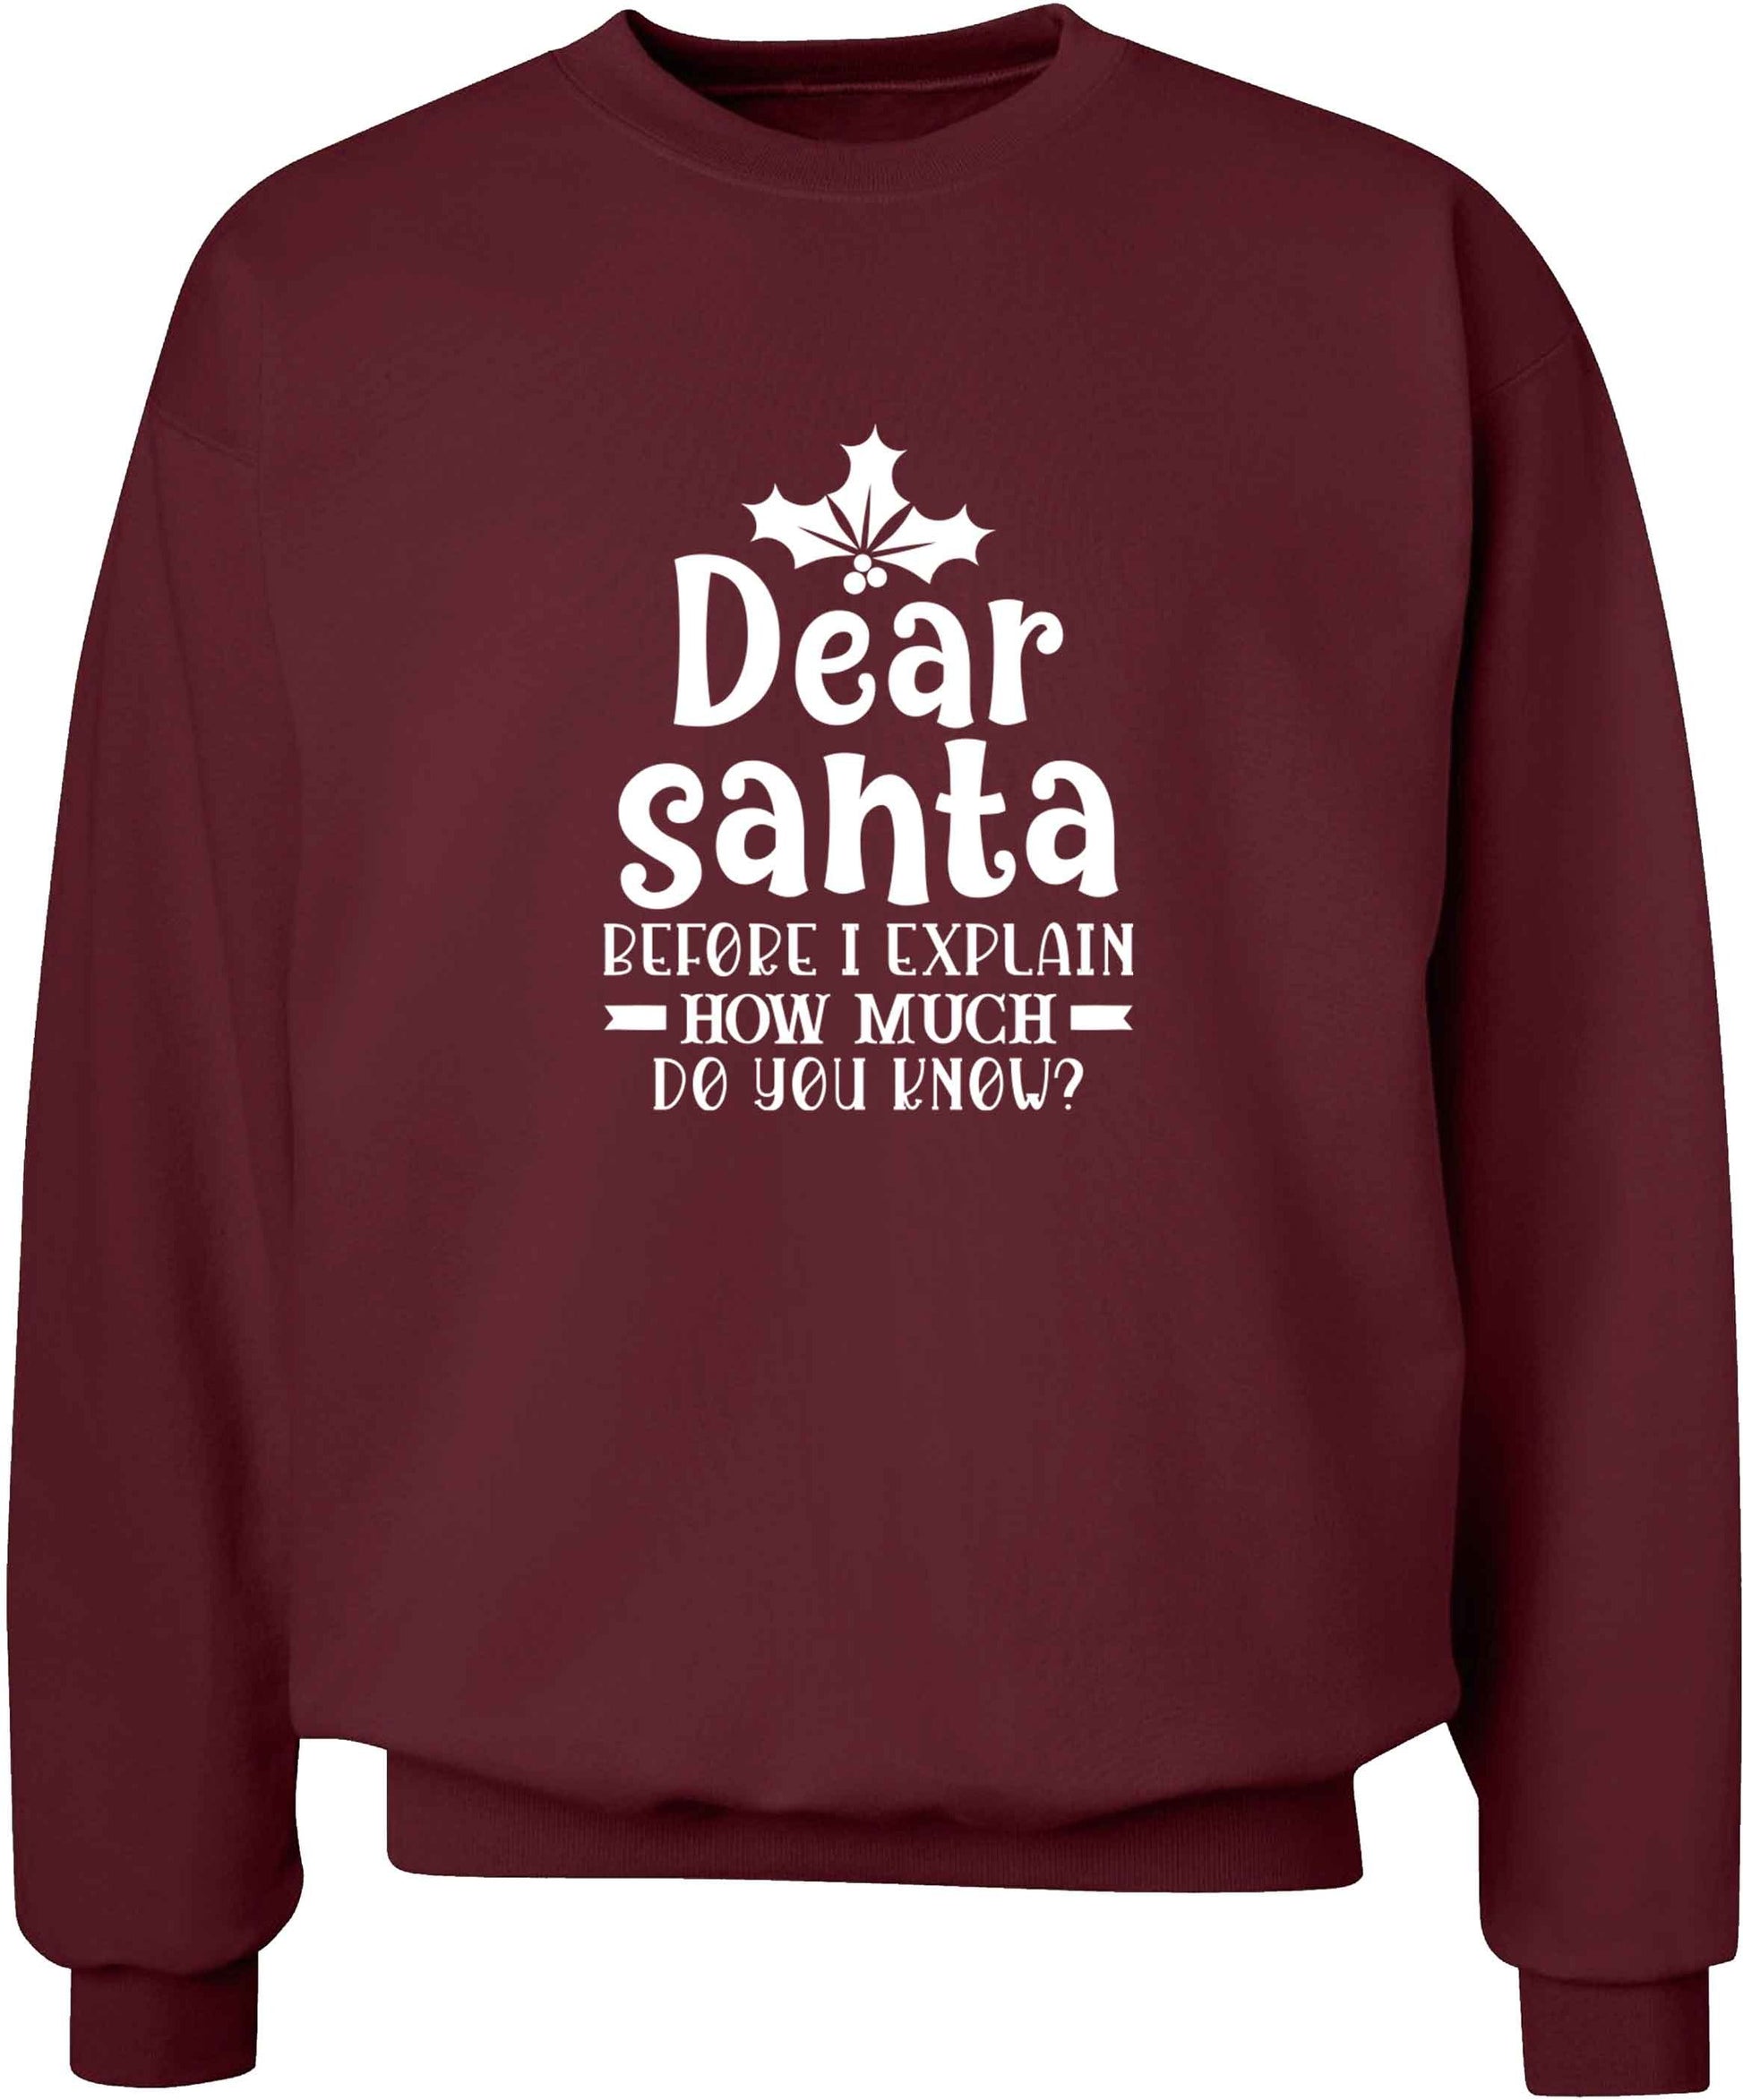 Santa before I explain how much do you know? adult's unisex maroon sweater 2XL